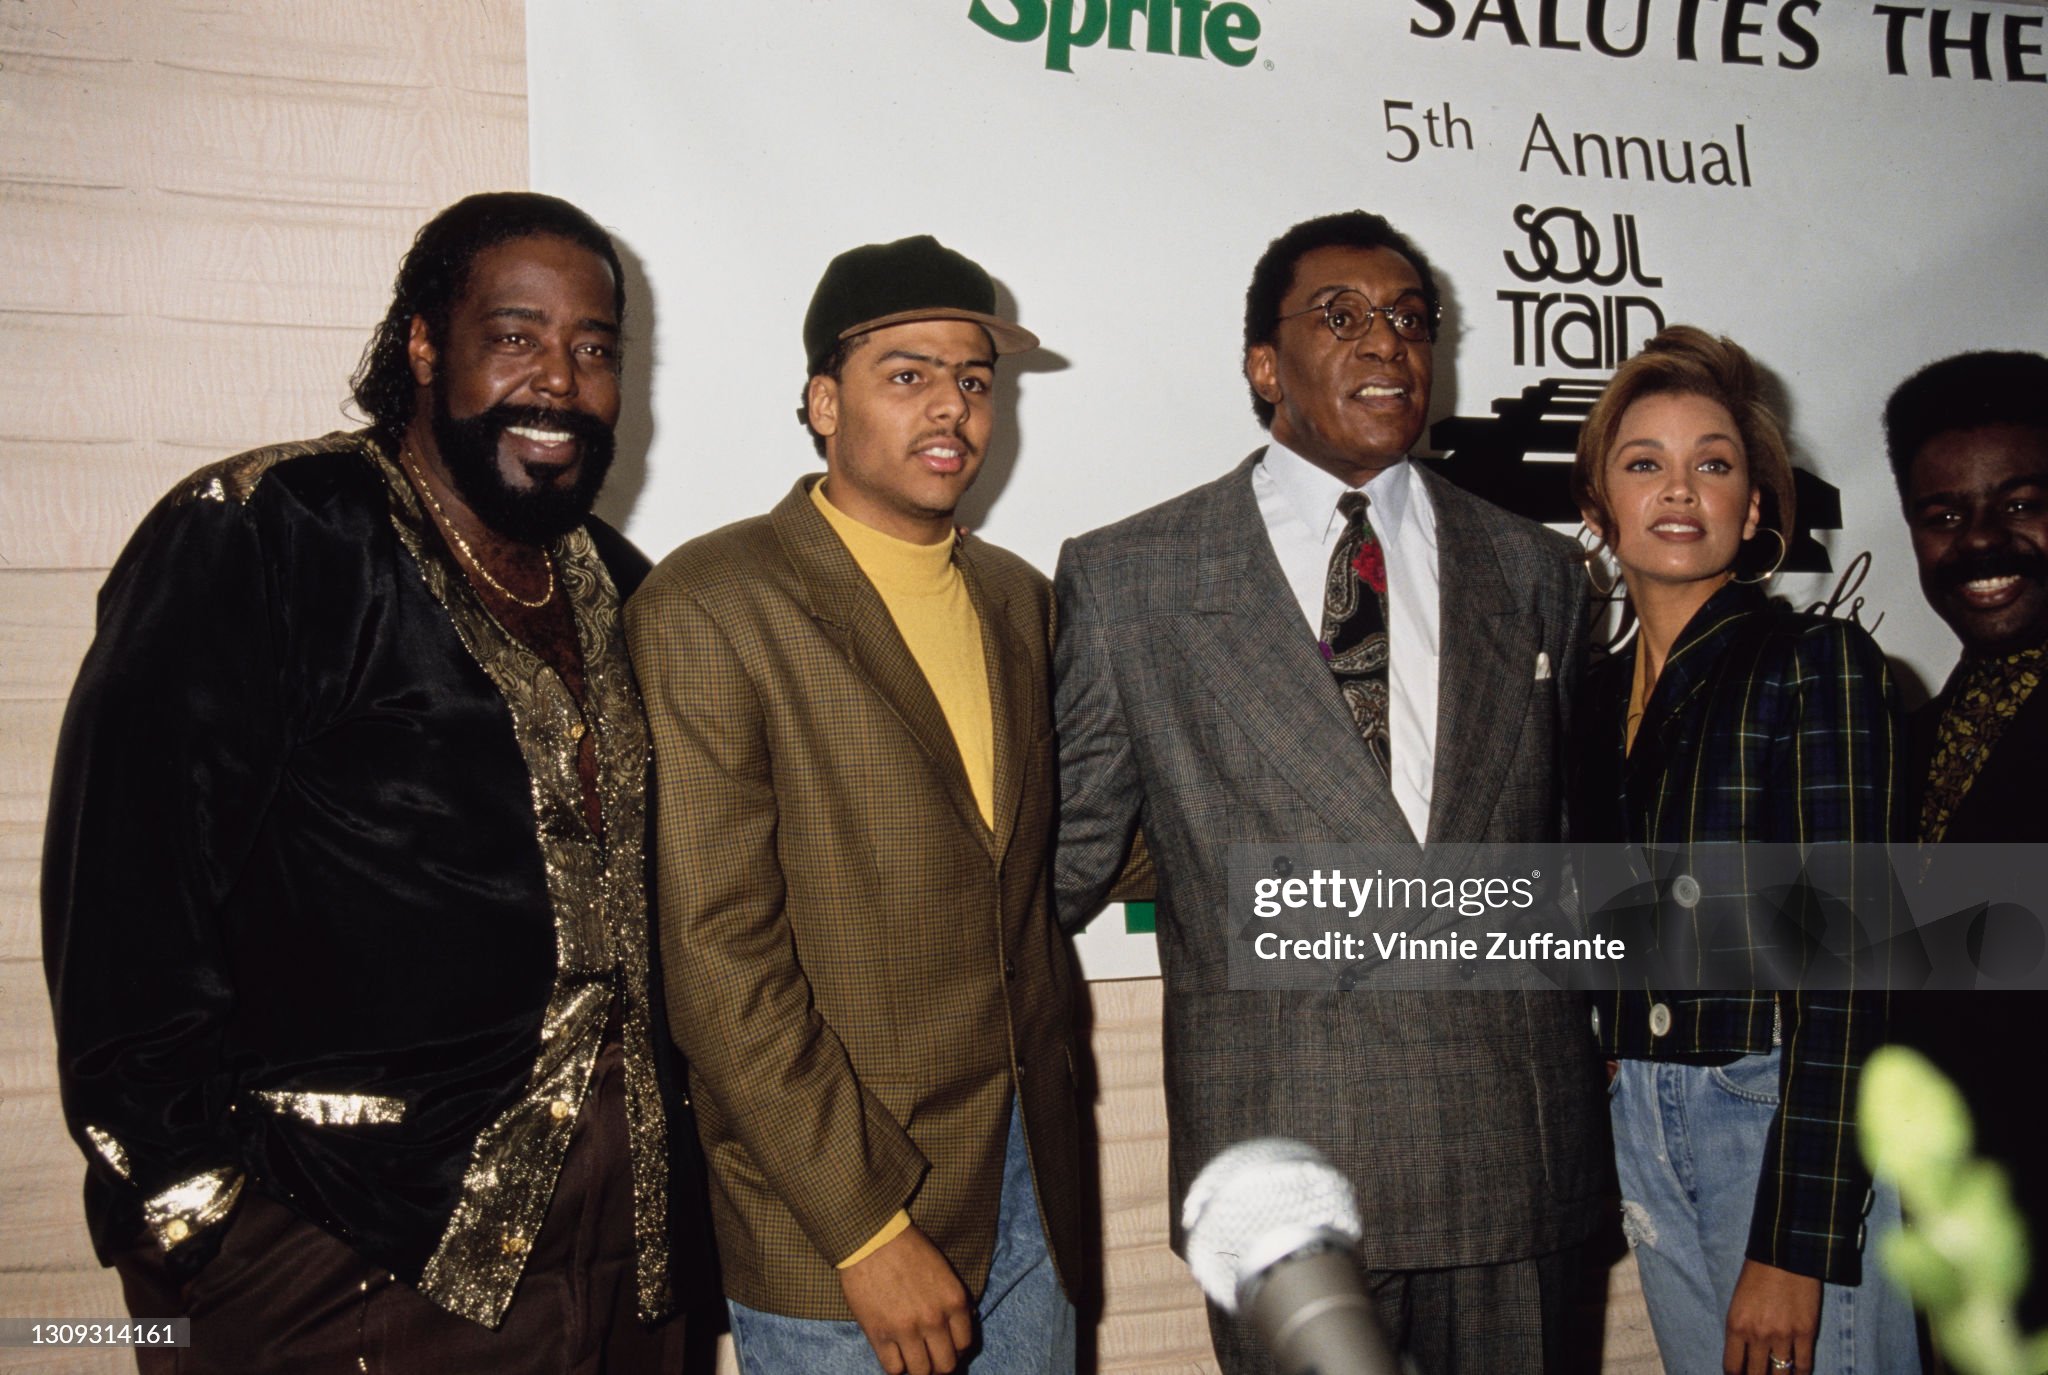 fifth-annual-soul-train-awards-nominations-celebration.jpg